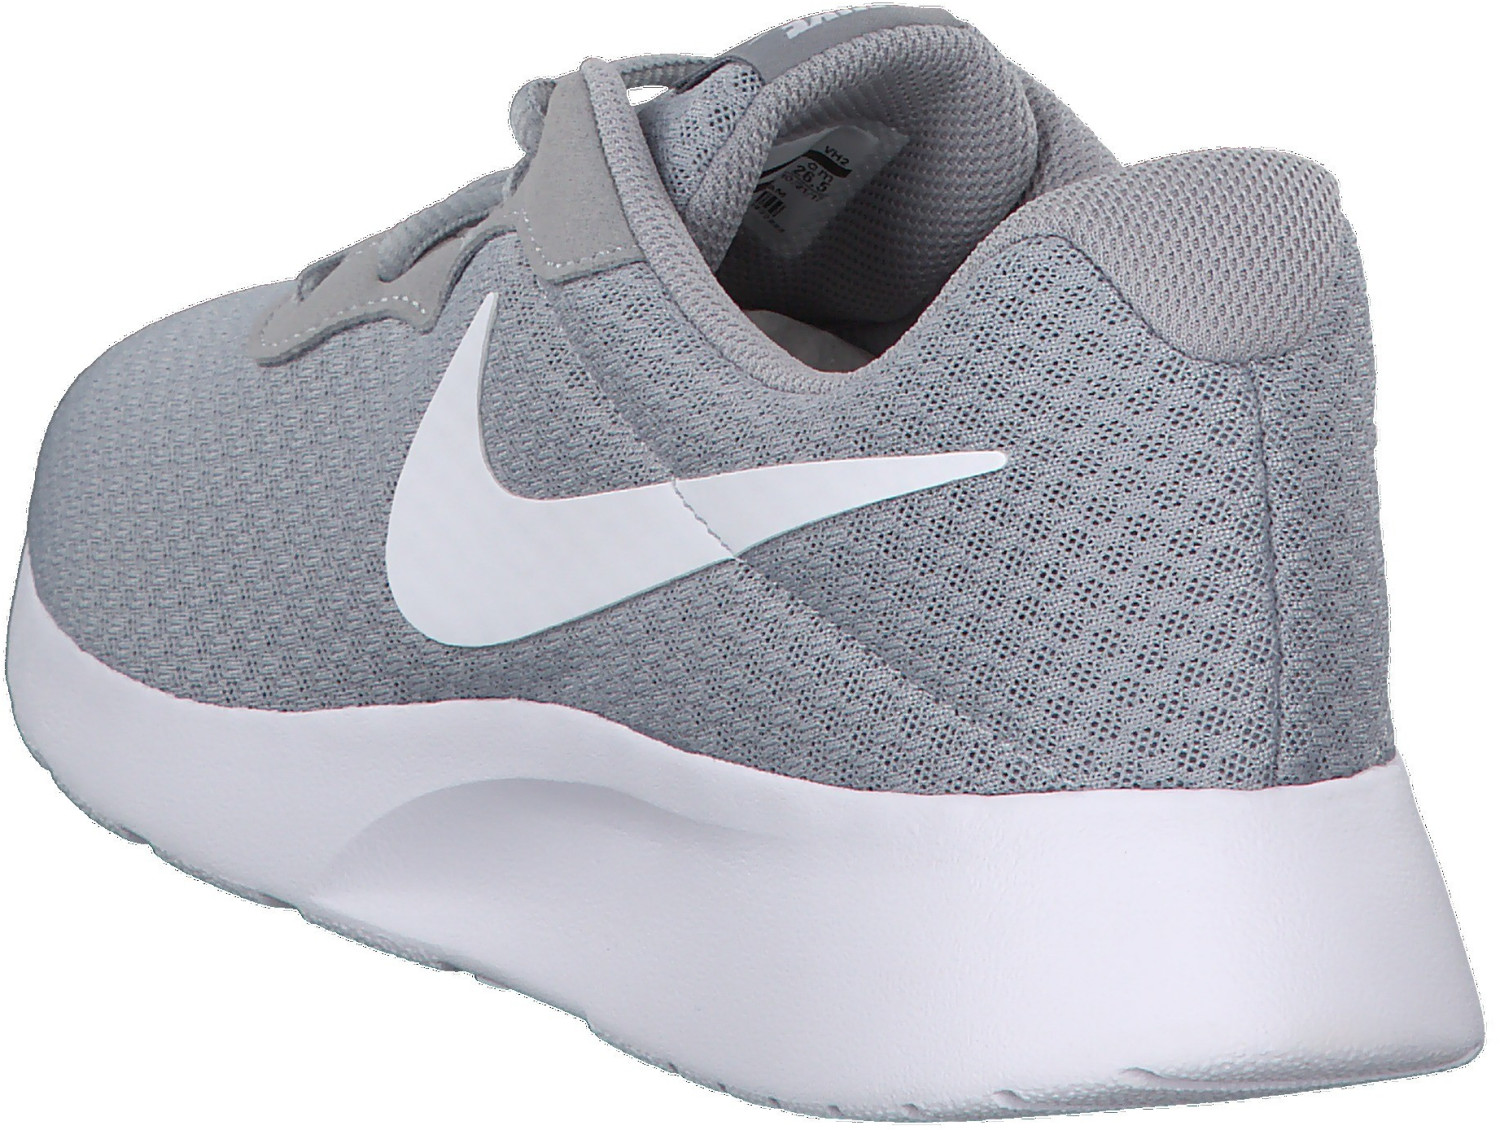 Buy Nike Tanjun Wolf Grey/White from £106.23 (Today) – Best Deals on ...